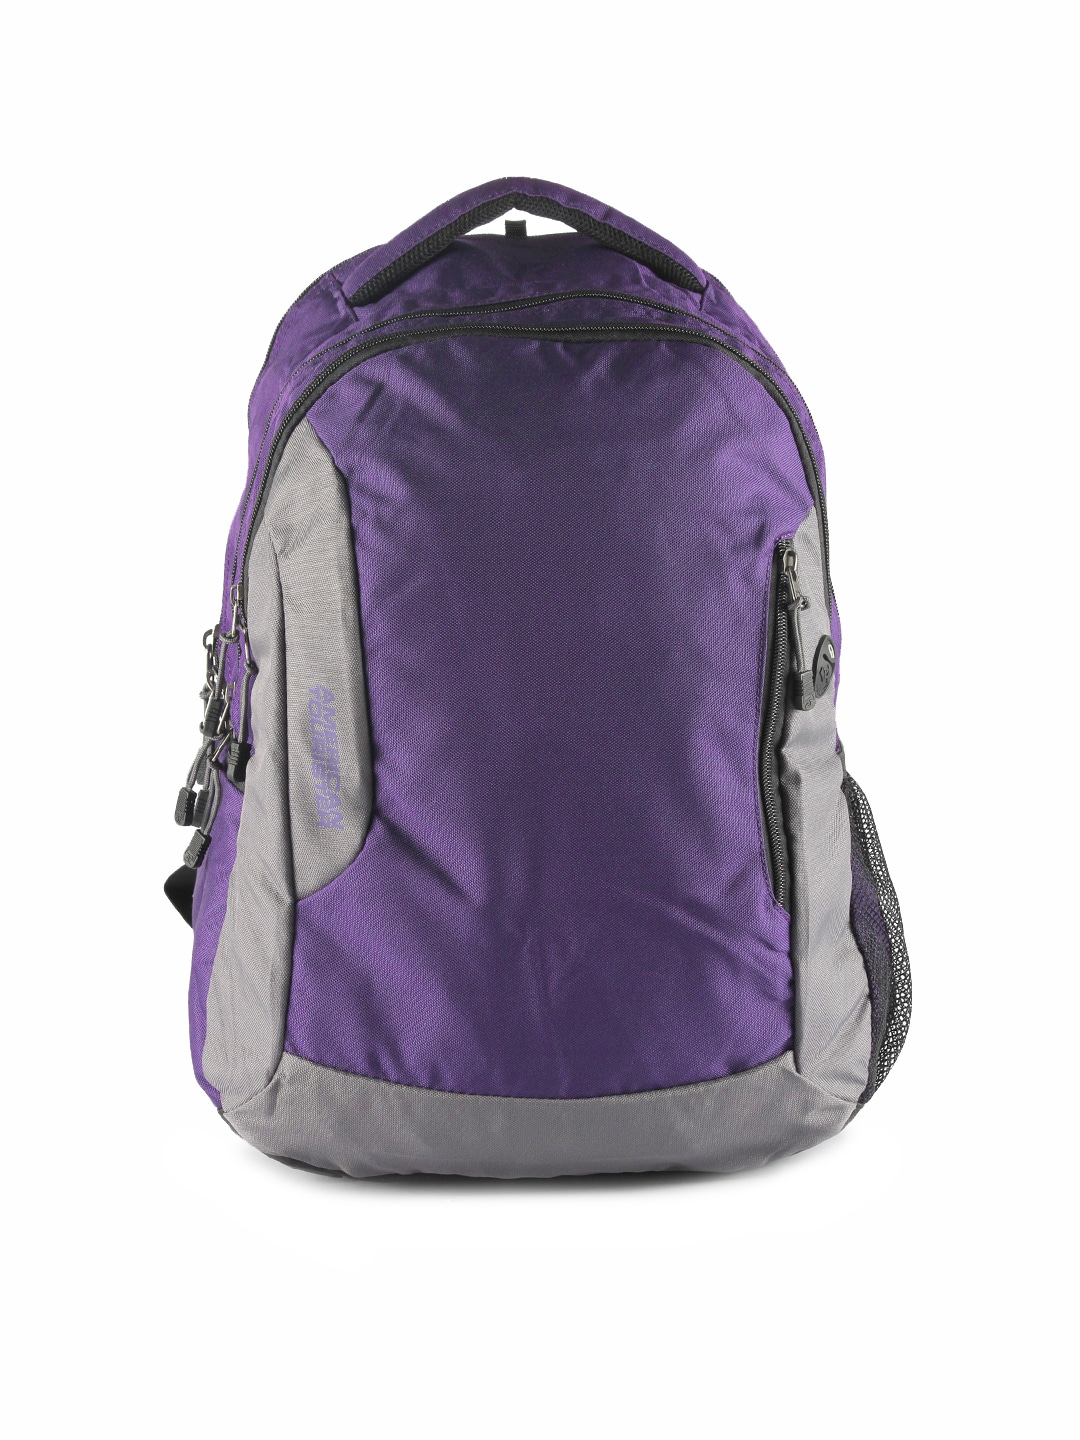 American Tourister Unisex Casual Purple Backpack